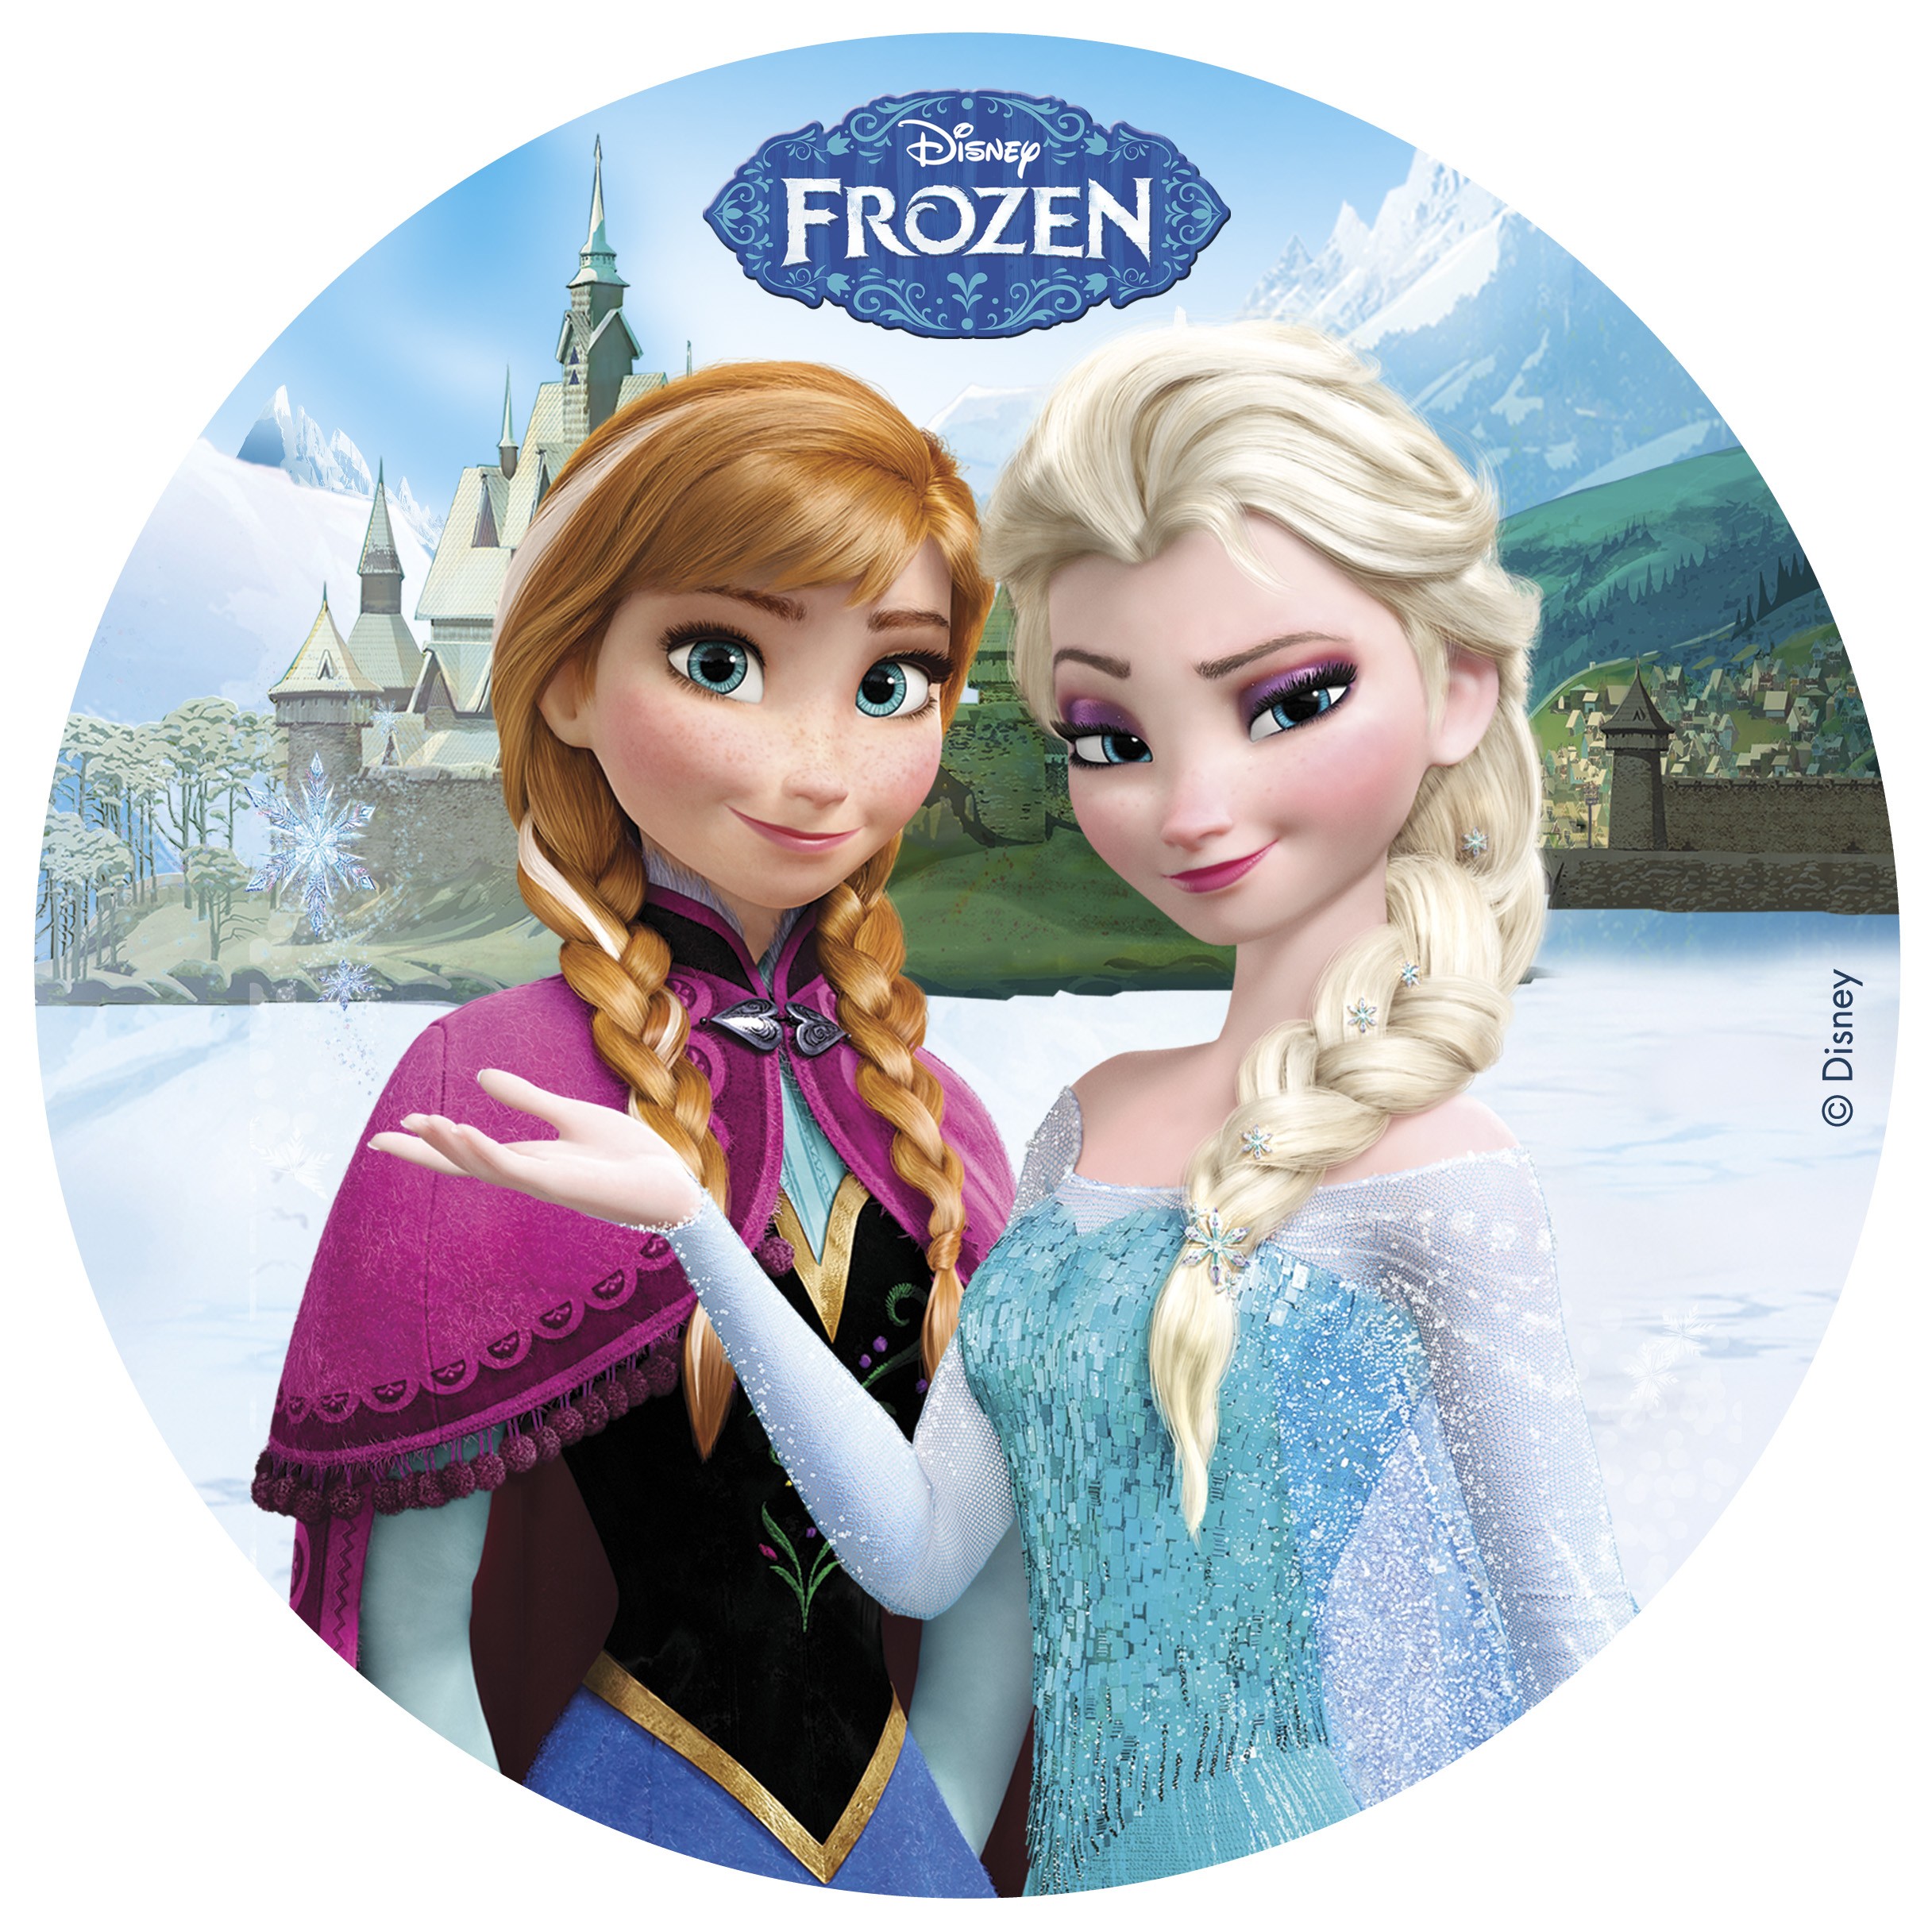 Frozen Gallery - Card Design And Card Template